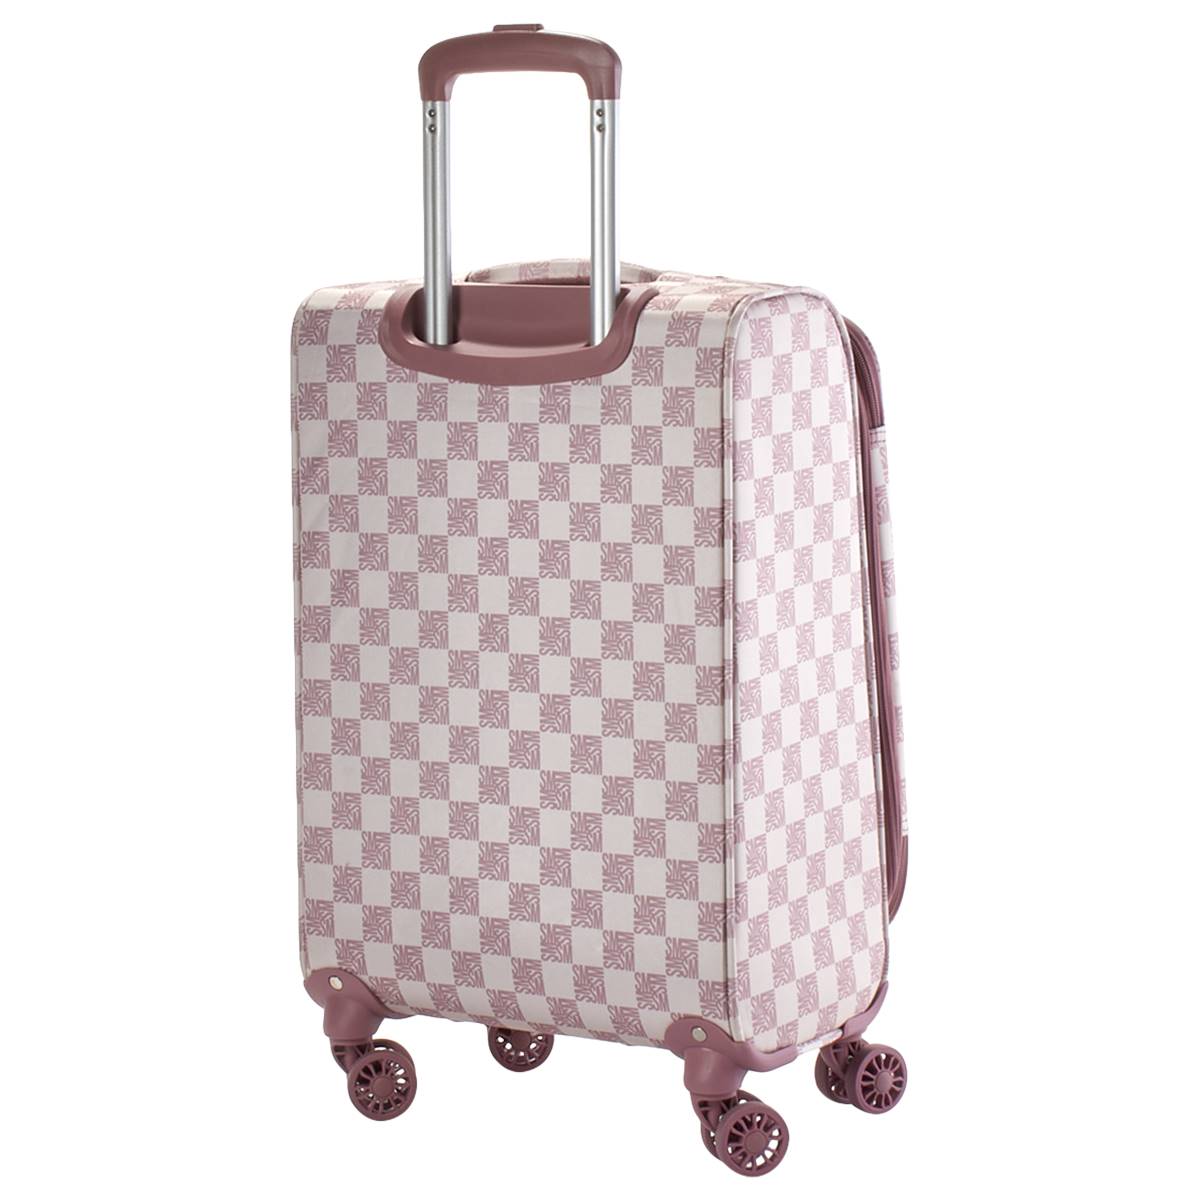 Steve Madden 20in. Chalet Carry-On Luggage